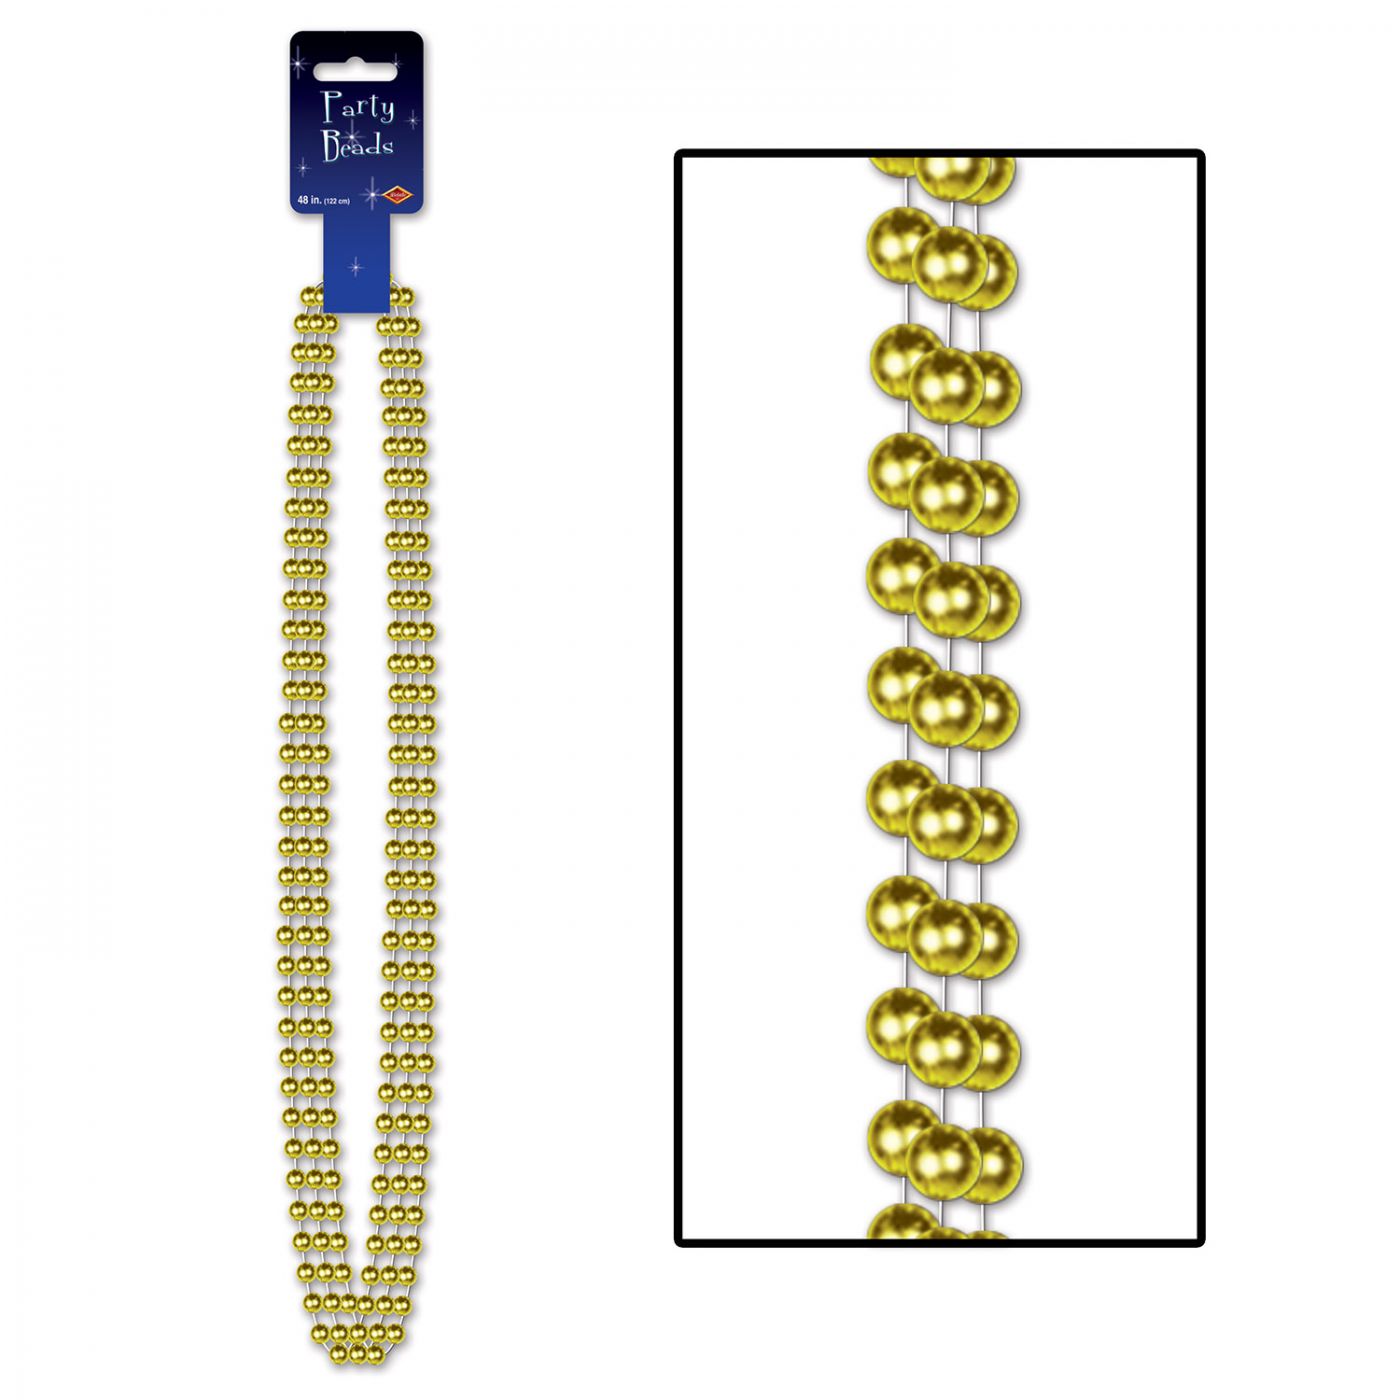 Party Beads - Large Round (12) image